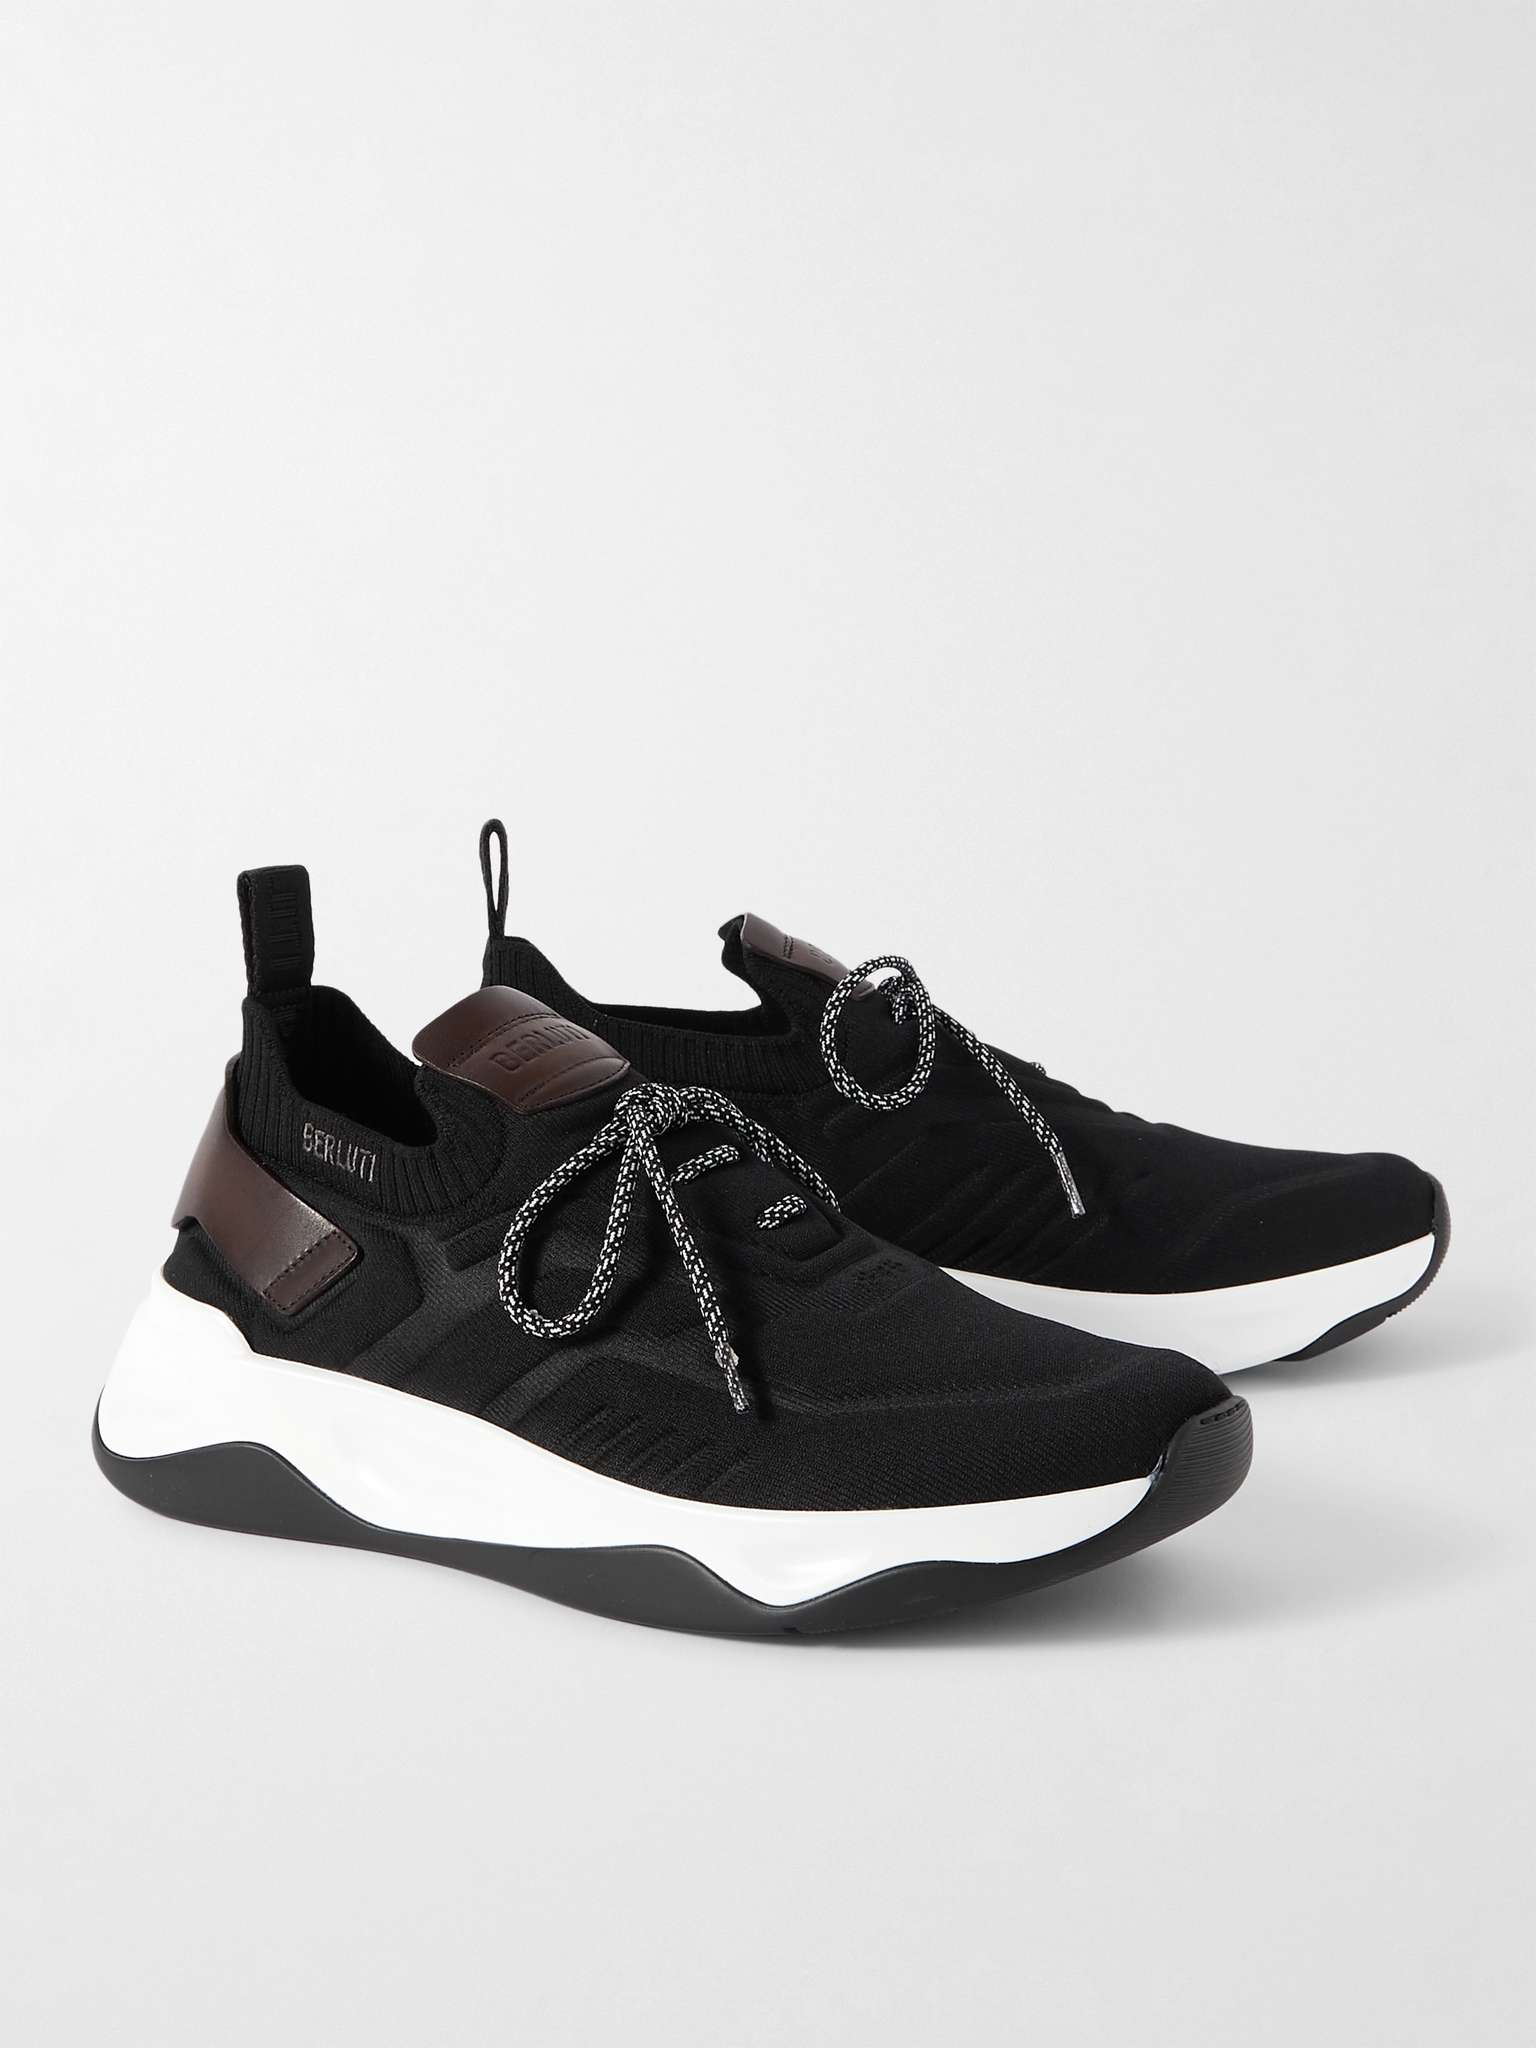 BERLUTI Shadow Venezia Leather-Trimmed Stretch-Knit Sneakers for Men ...